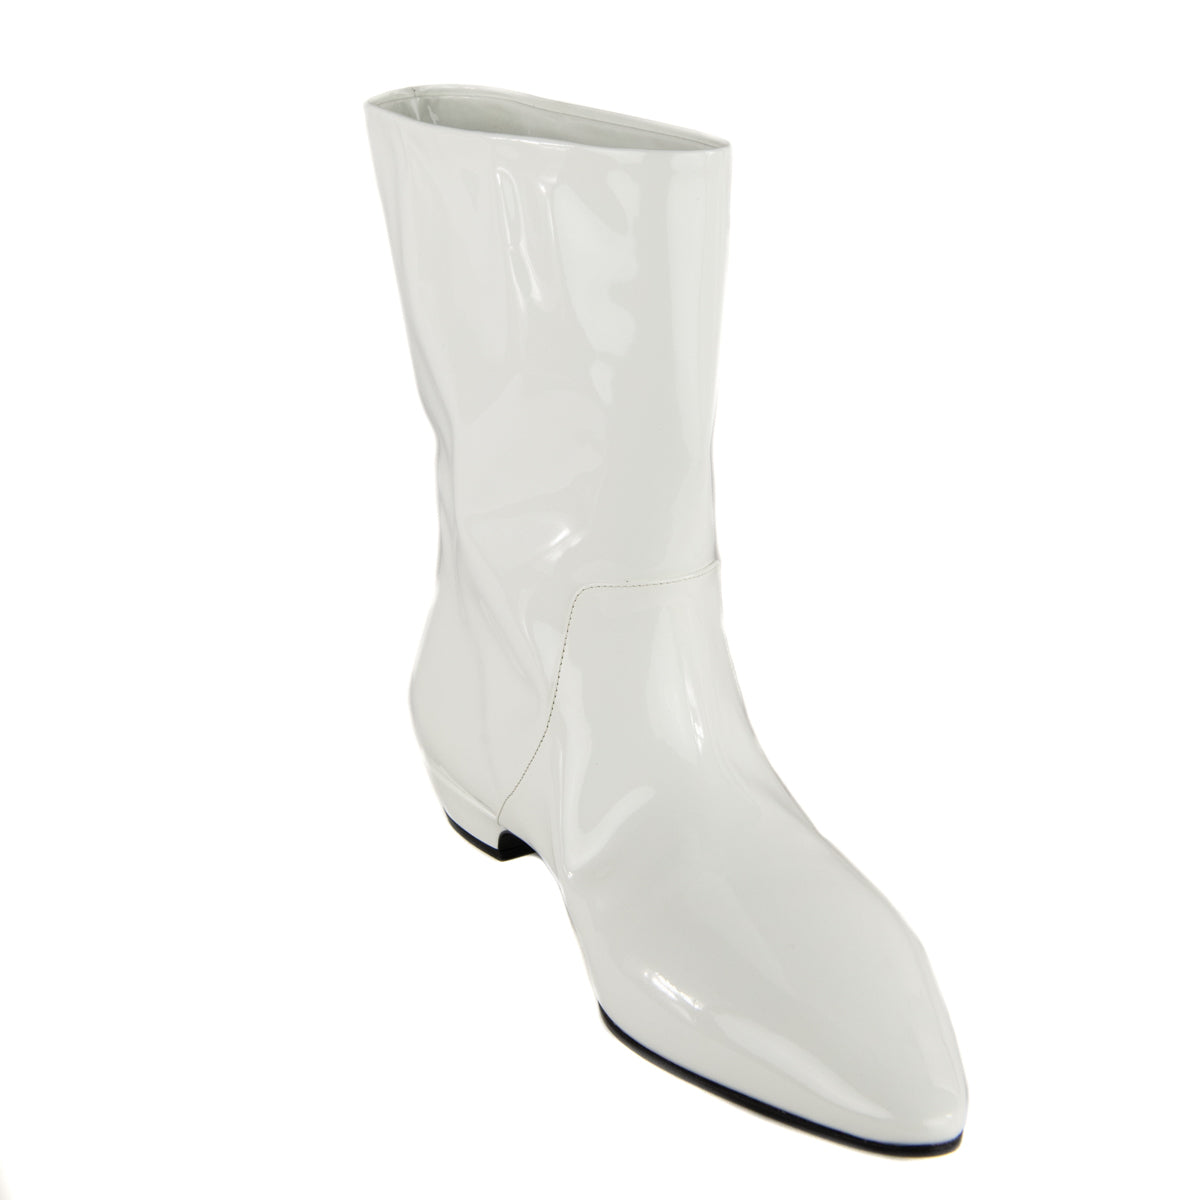 Miu Miu White Patent Leather Logo Ankle Boots Size 11 | EU 41 - Love that Bag etc - Preowned Authentic Designer Handbags & Preloved Fashions